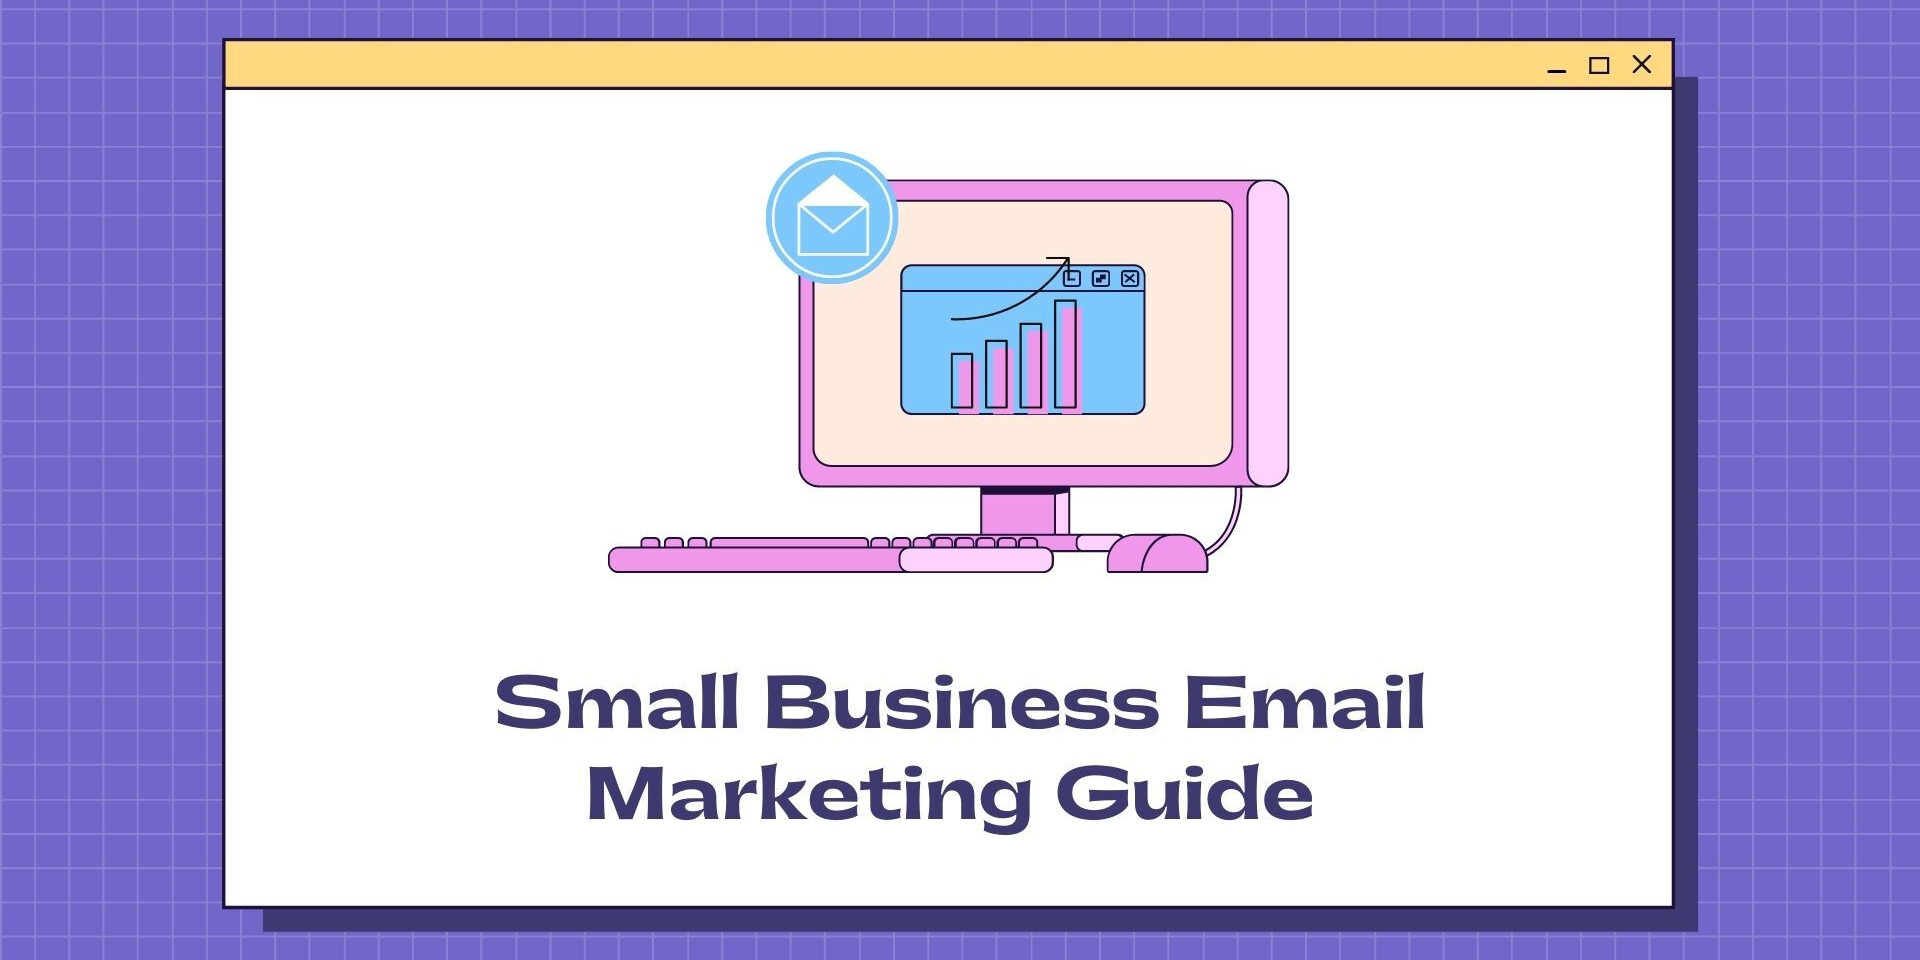 Small business email marketing guide